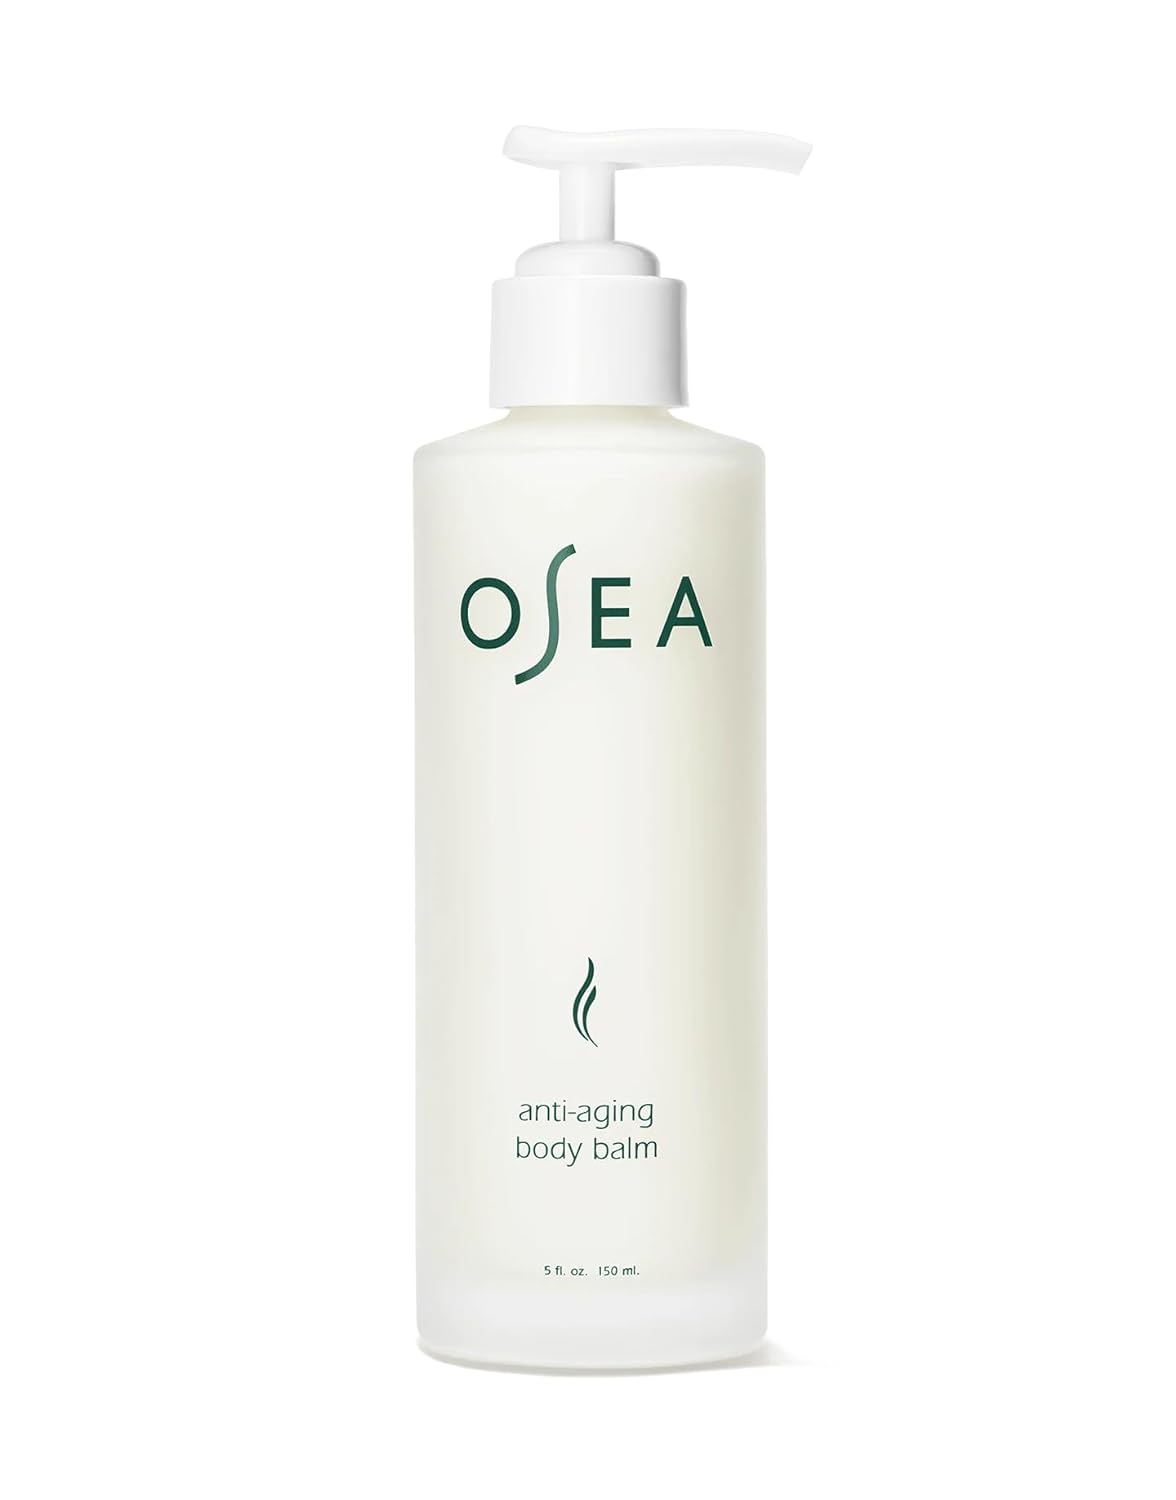 OSEA Anti-Aging Body Balm - 5 oz - Luxurious Gift for Silky Glowing Skin - Firming & Hydrating Seaweed Lotion - Clean Vegan Body Care : Beauty & Personal Care